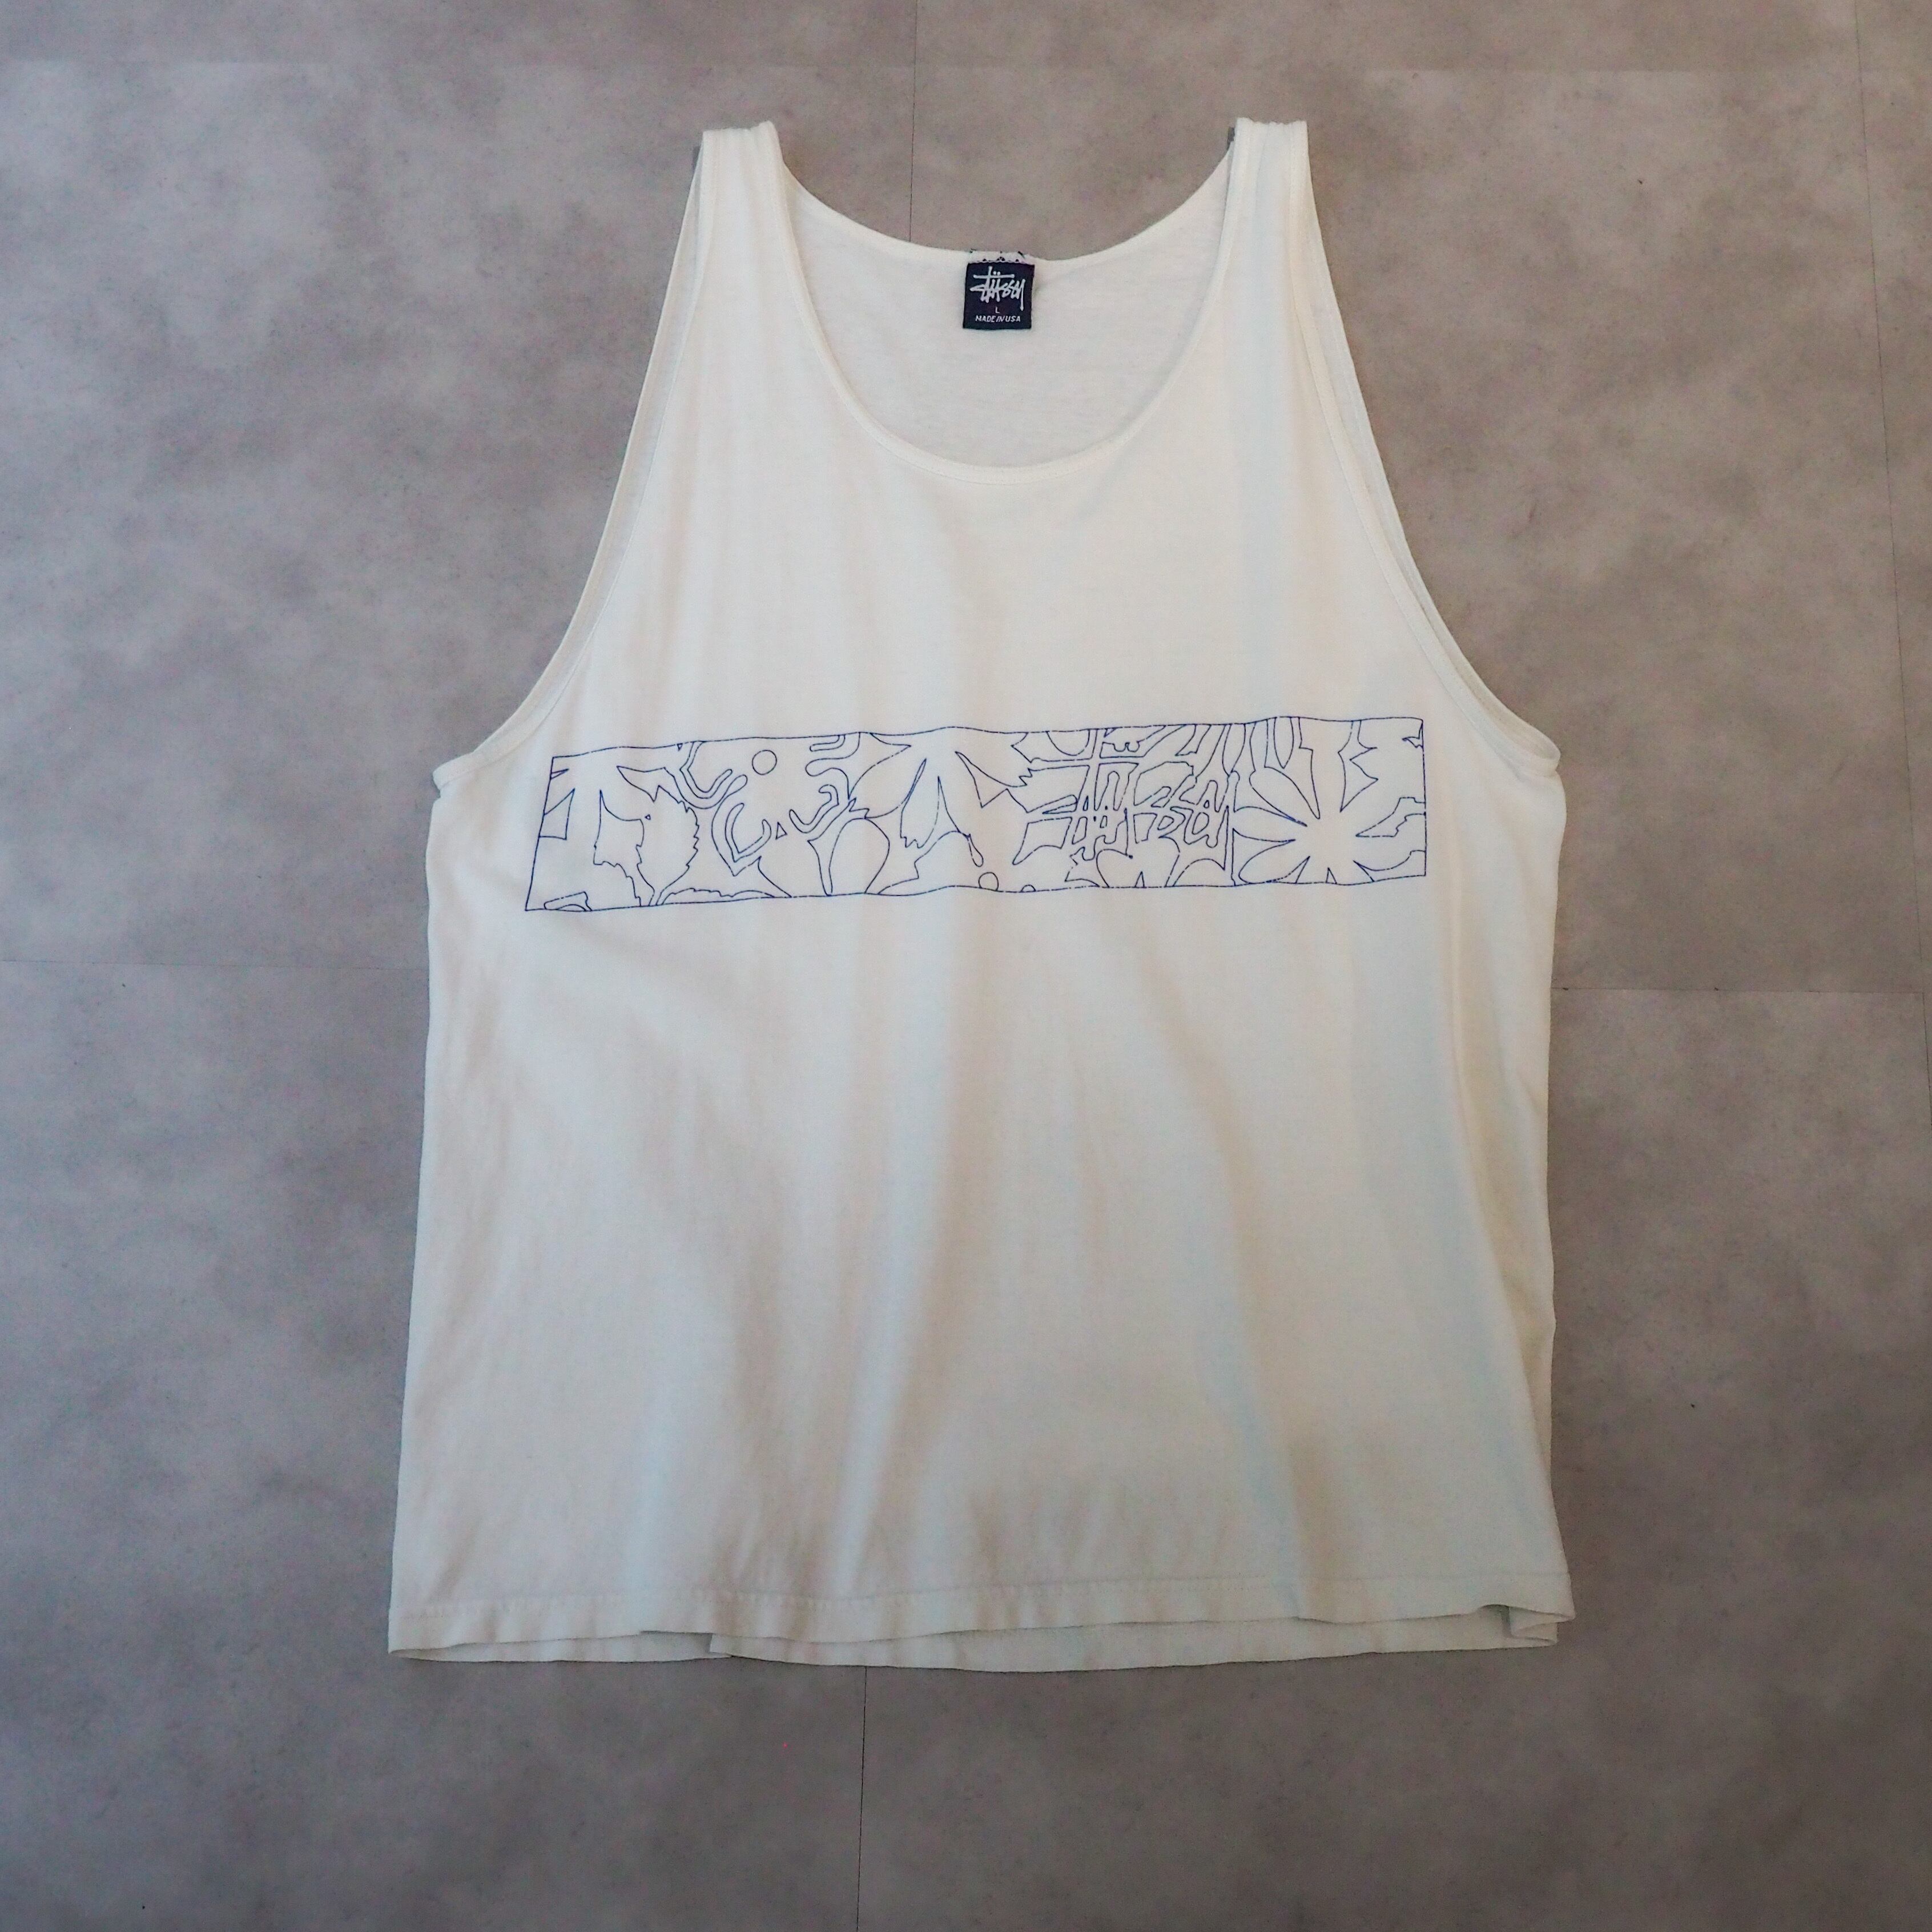 90s-00s “stussy” tank top made in USA 90年代後半〜00年代初頭 ストゥーシー usa製 タンクトップ